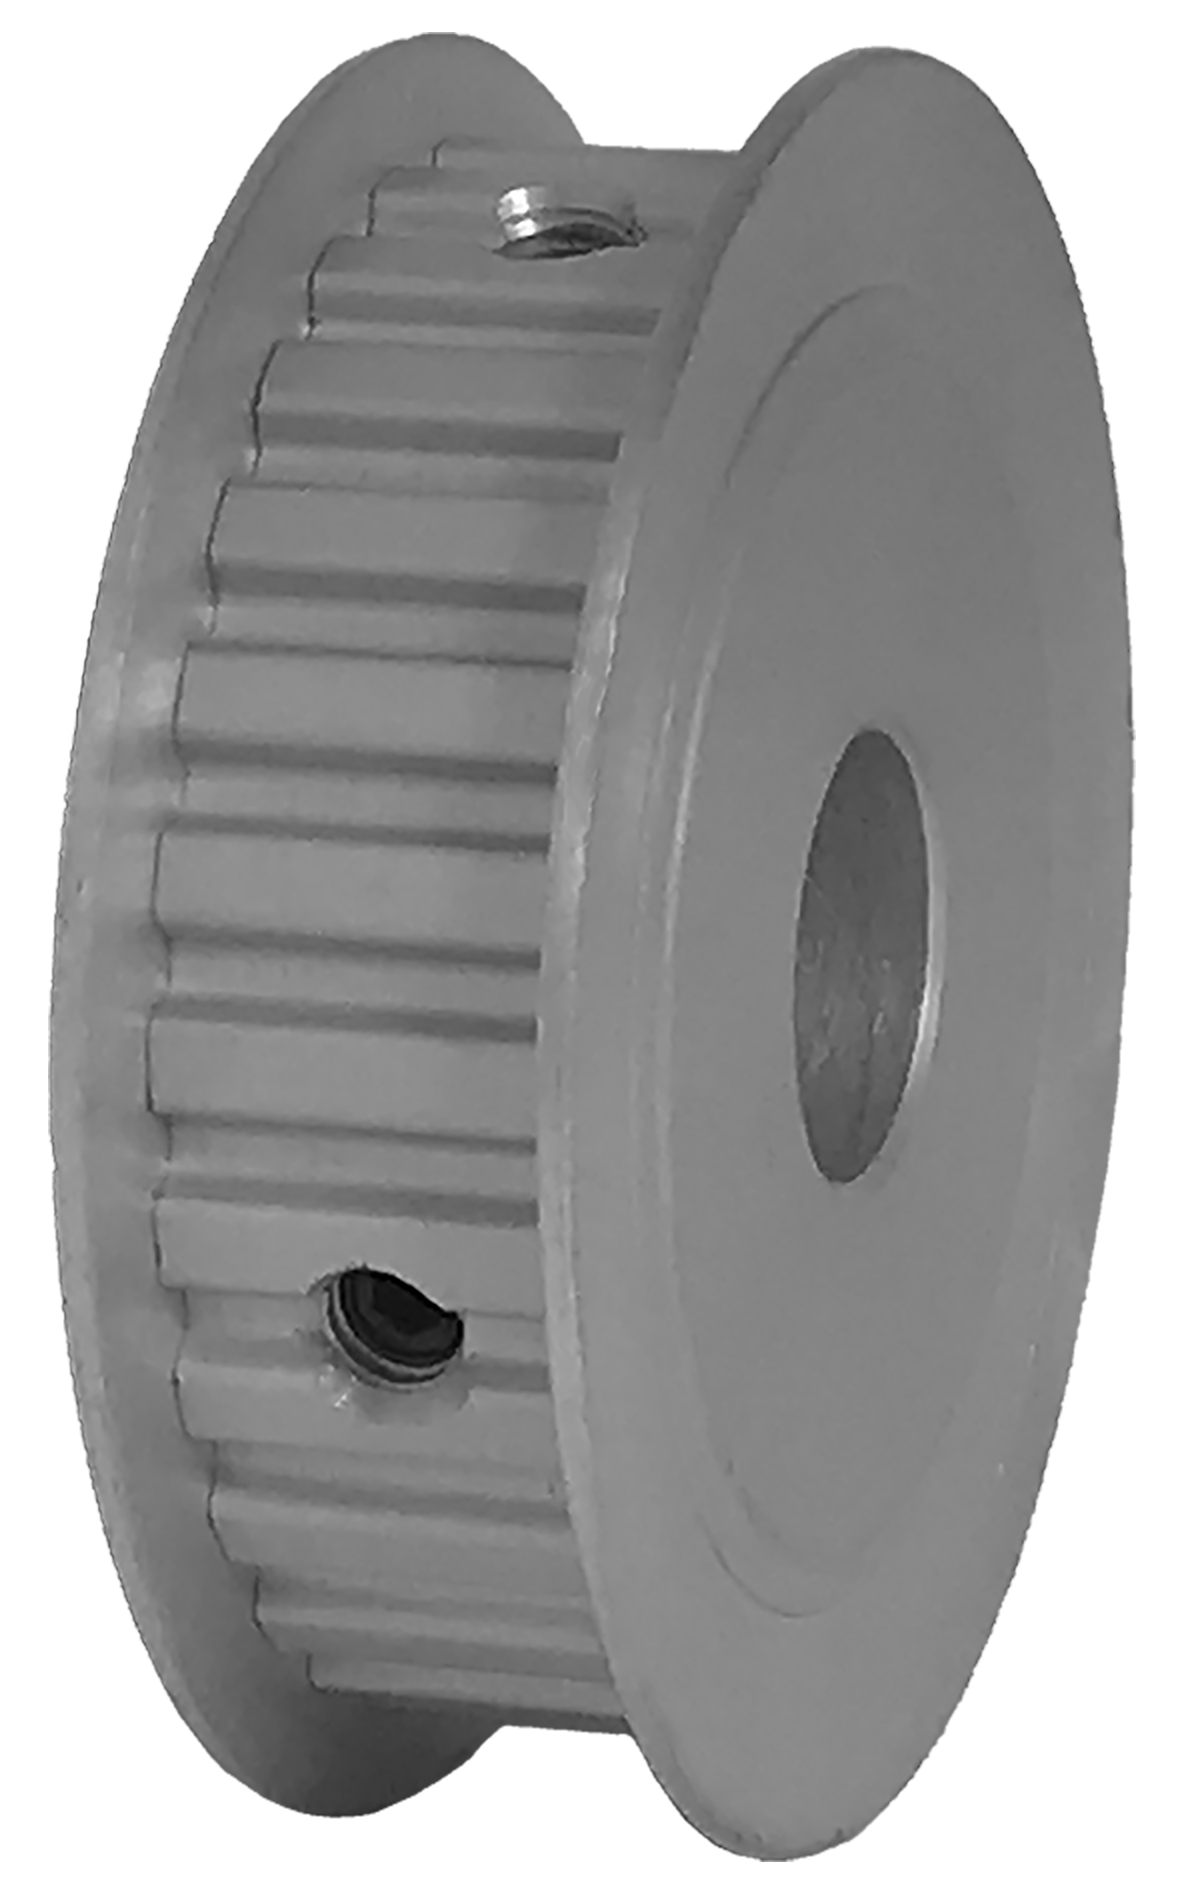 28XL037-3FA6 - Aluminum Imperial Pitch Pulleys